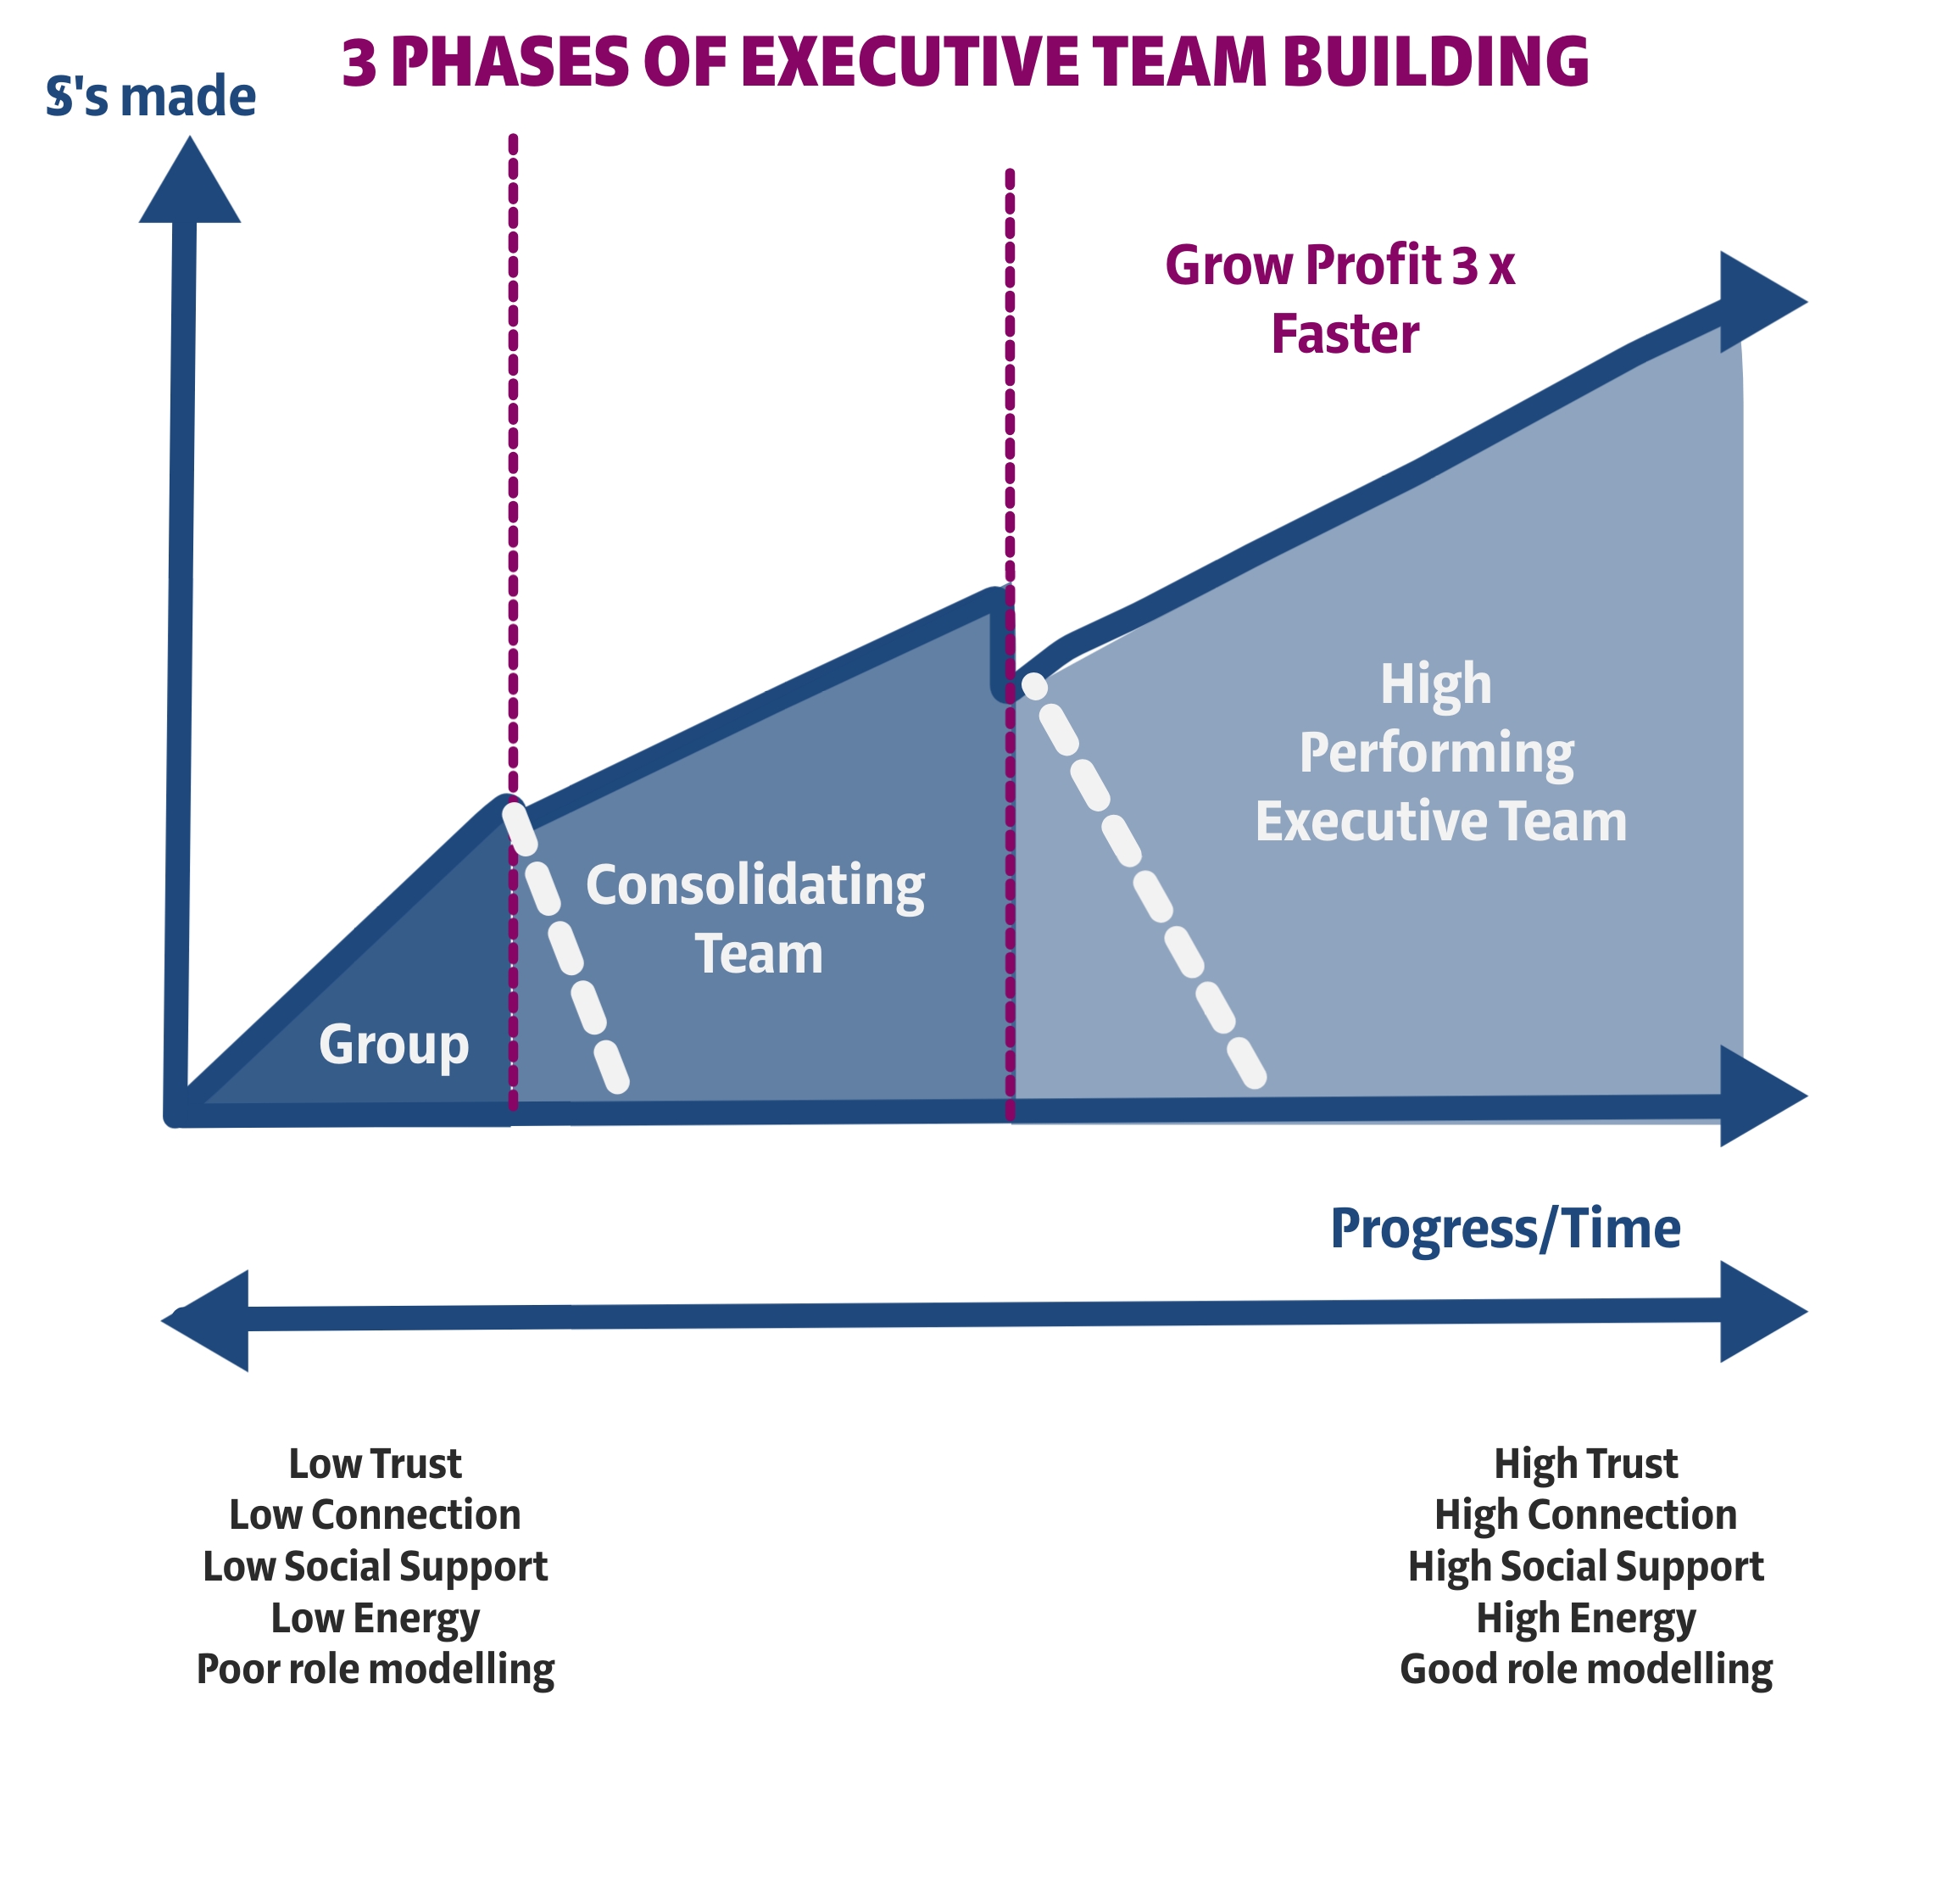 3-PHASES-OF-EXECUTIVE-TEAM-BUILDING